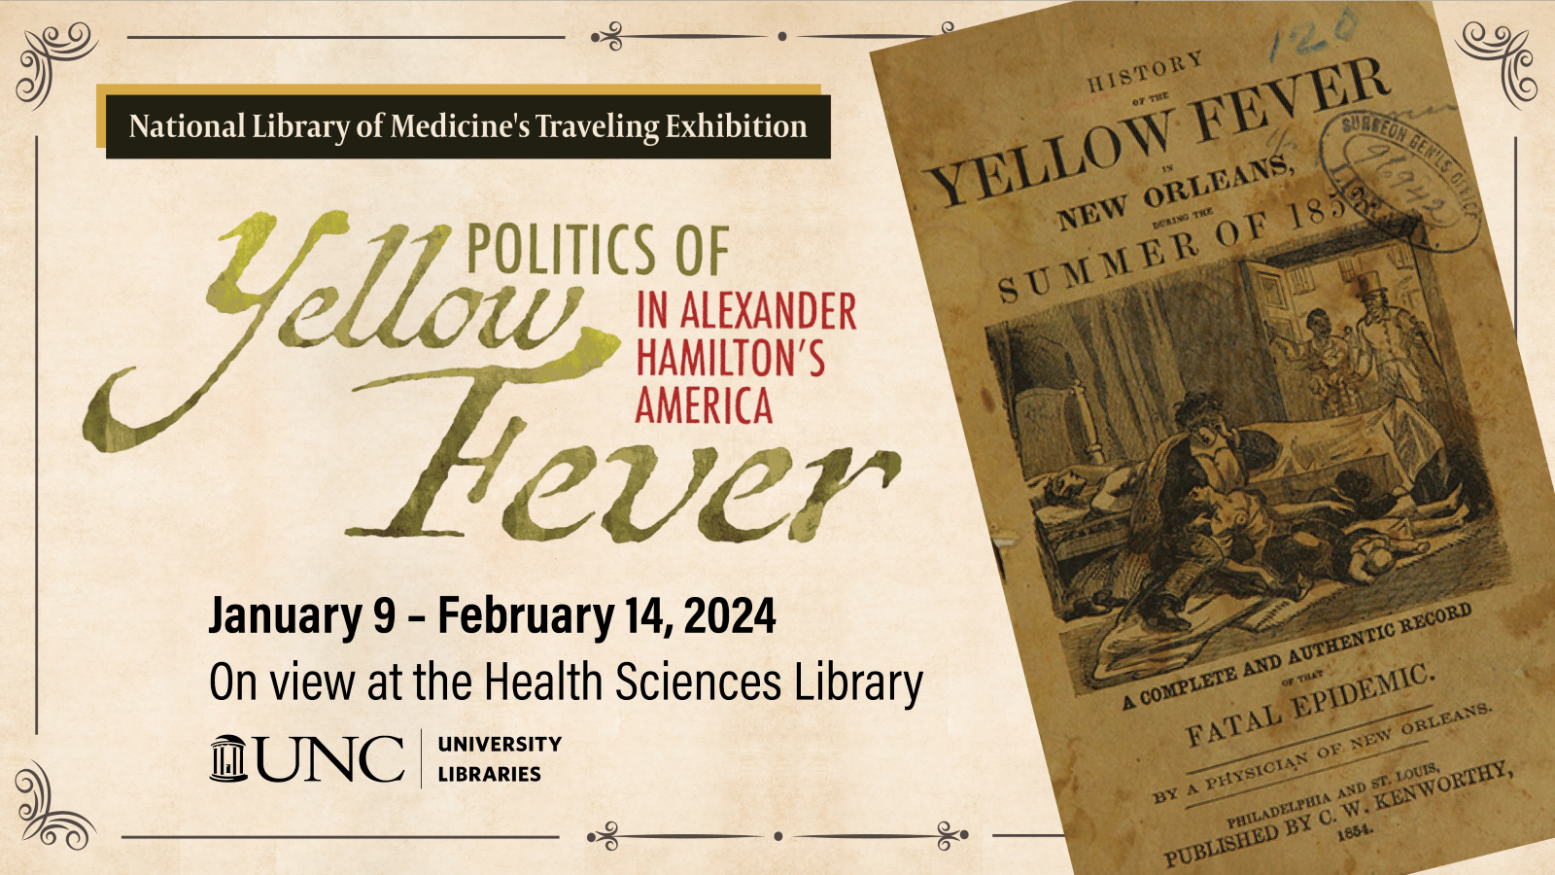 HSL hosts NLM Traveling Exhibit on “The Politics of Yellow Fever”.  Now through February 14, 2024 in HSL Lobby.